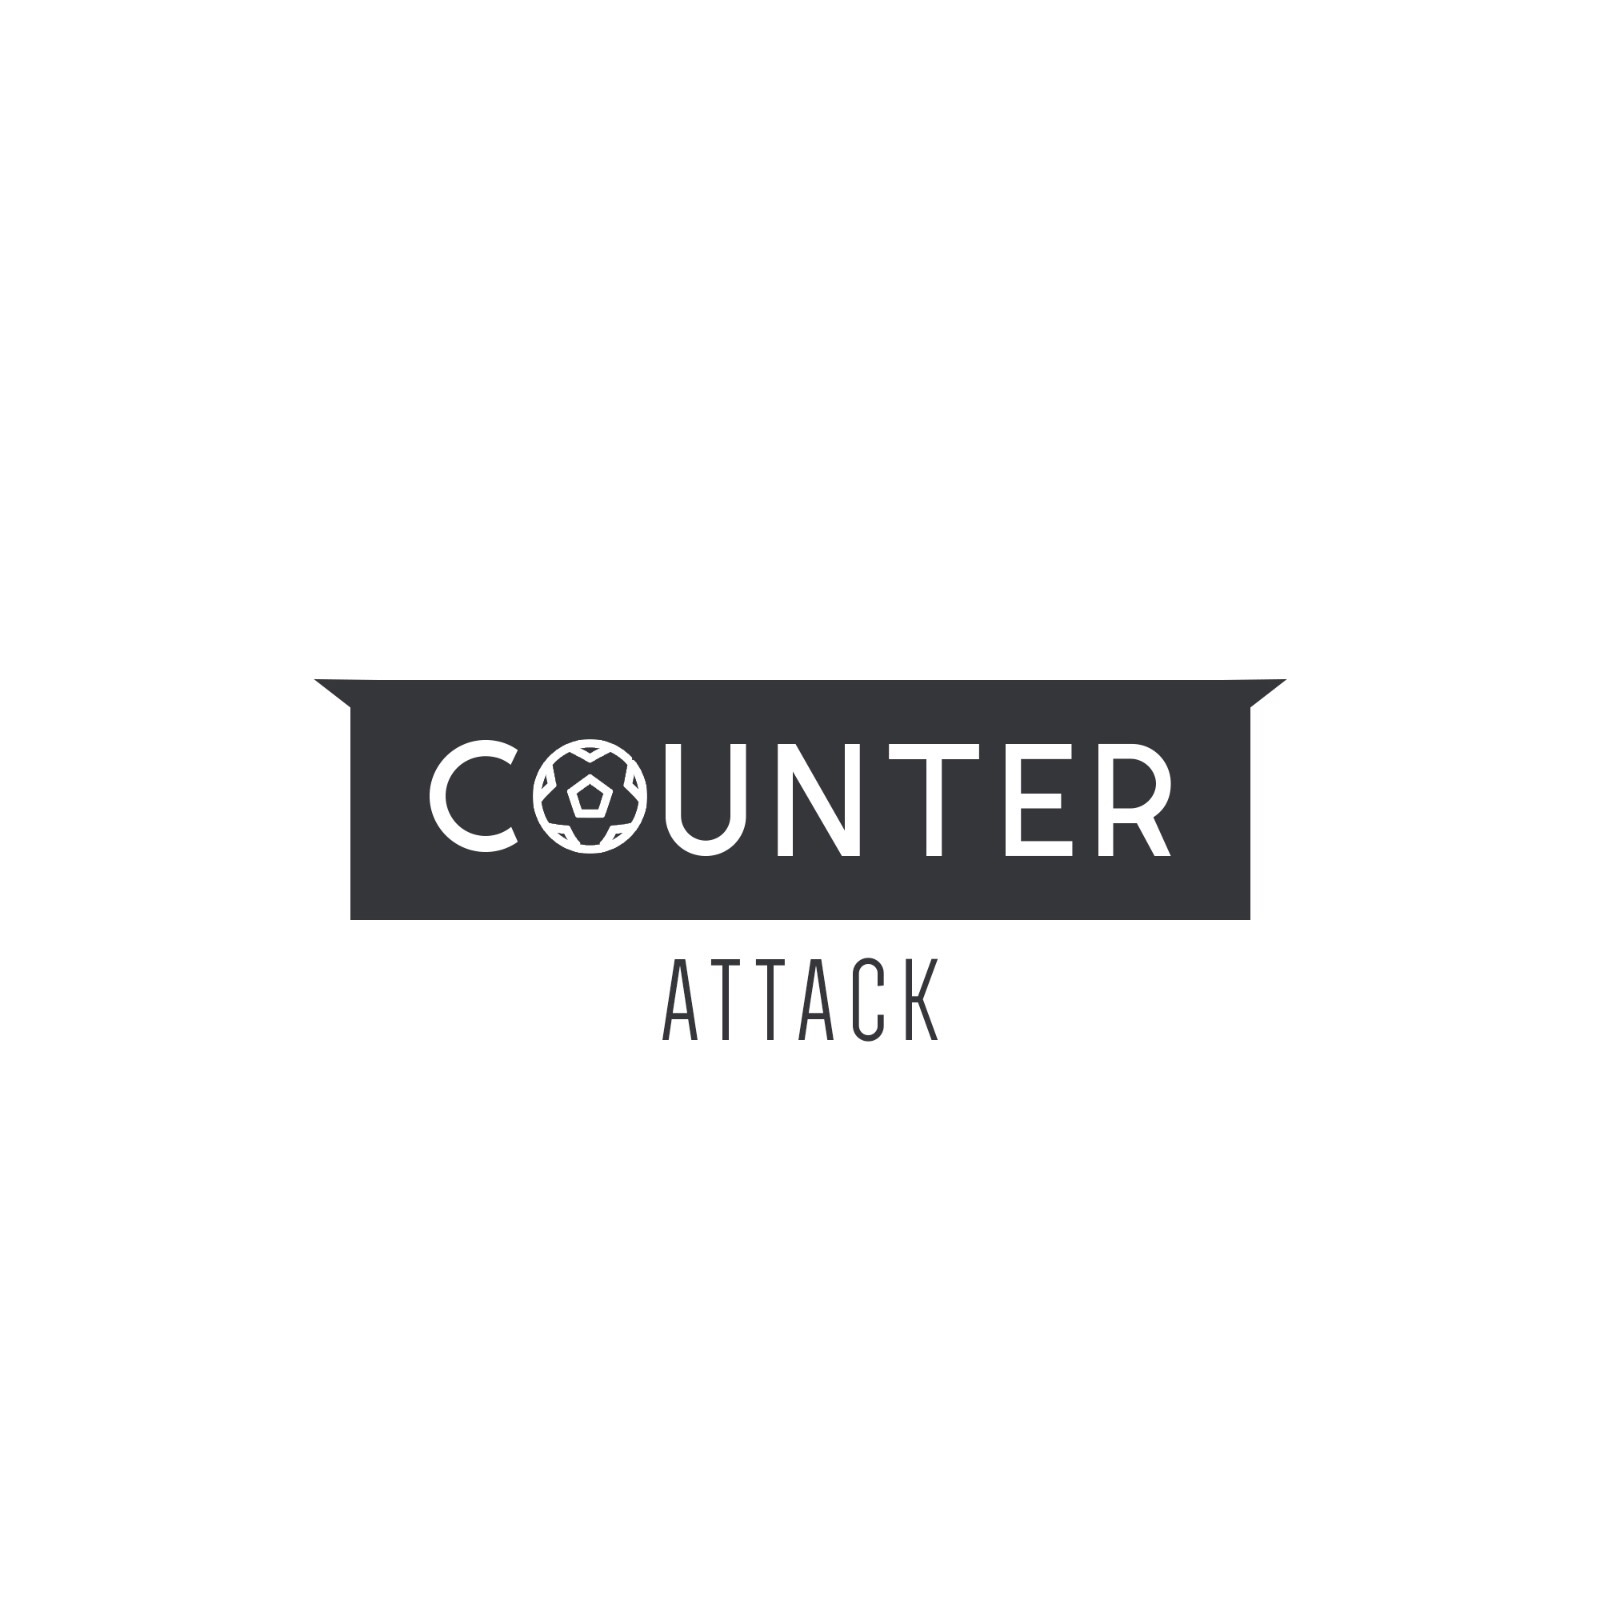 Counter Attack - Episode 79 - Racism Debate Comes Up Again. Media To Blame?